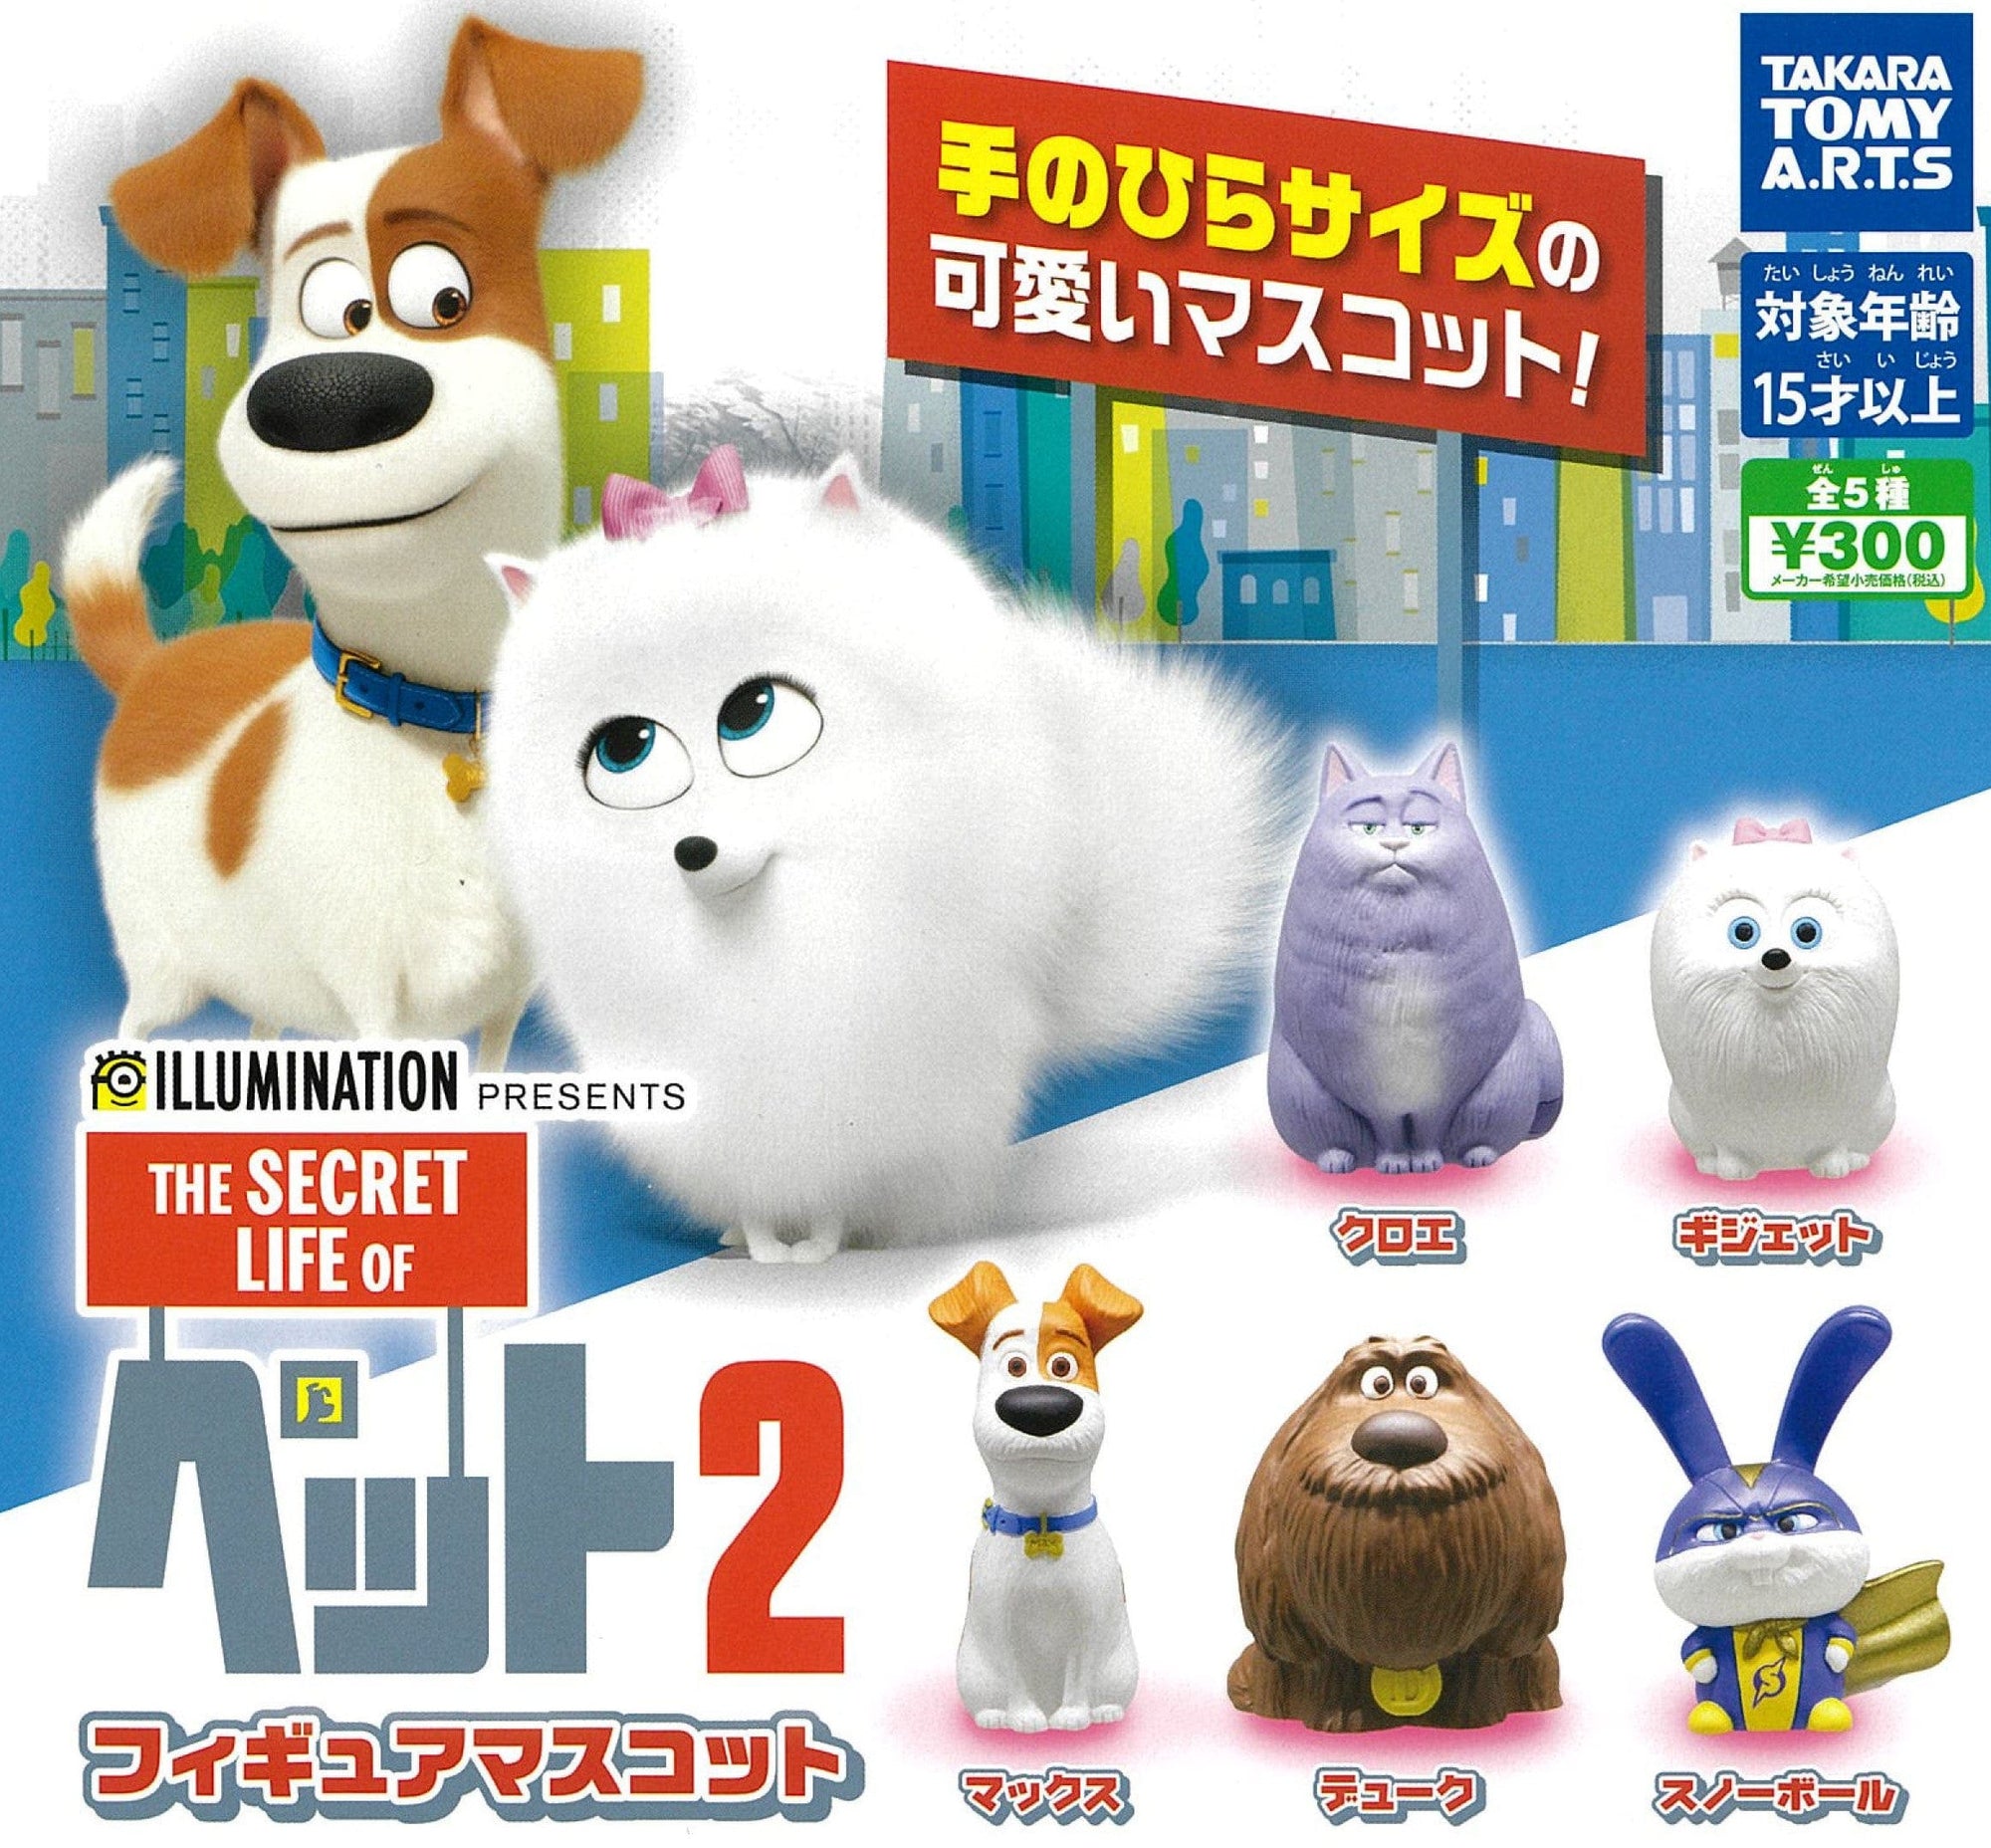 Takara Tomy A.R.T.S CP0351 - The Secret Life of Pets 02 - Figure Mascot - Complete Set